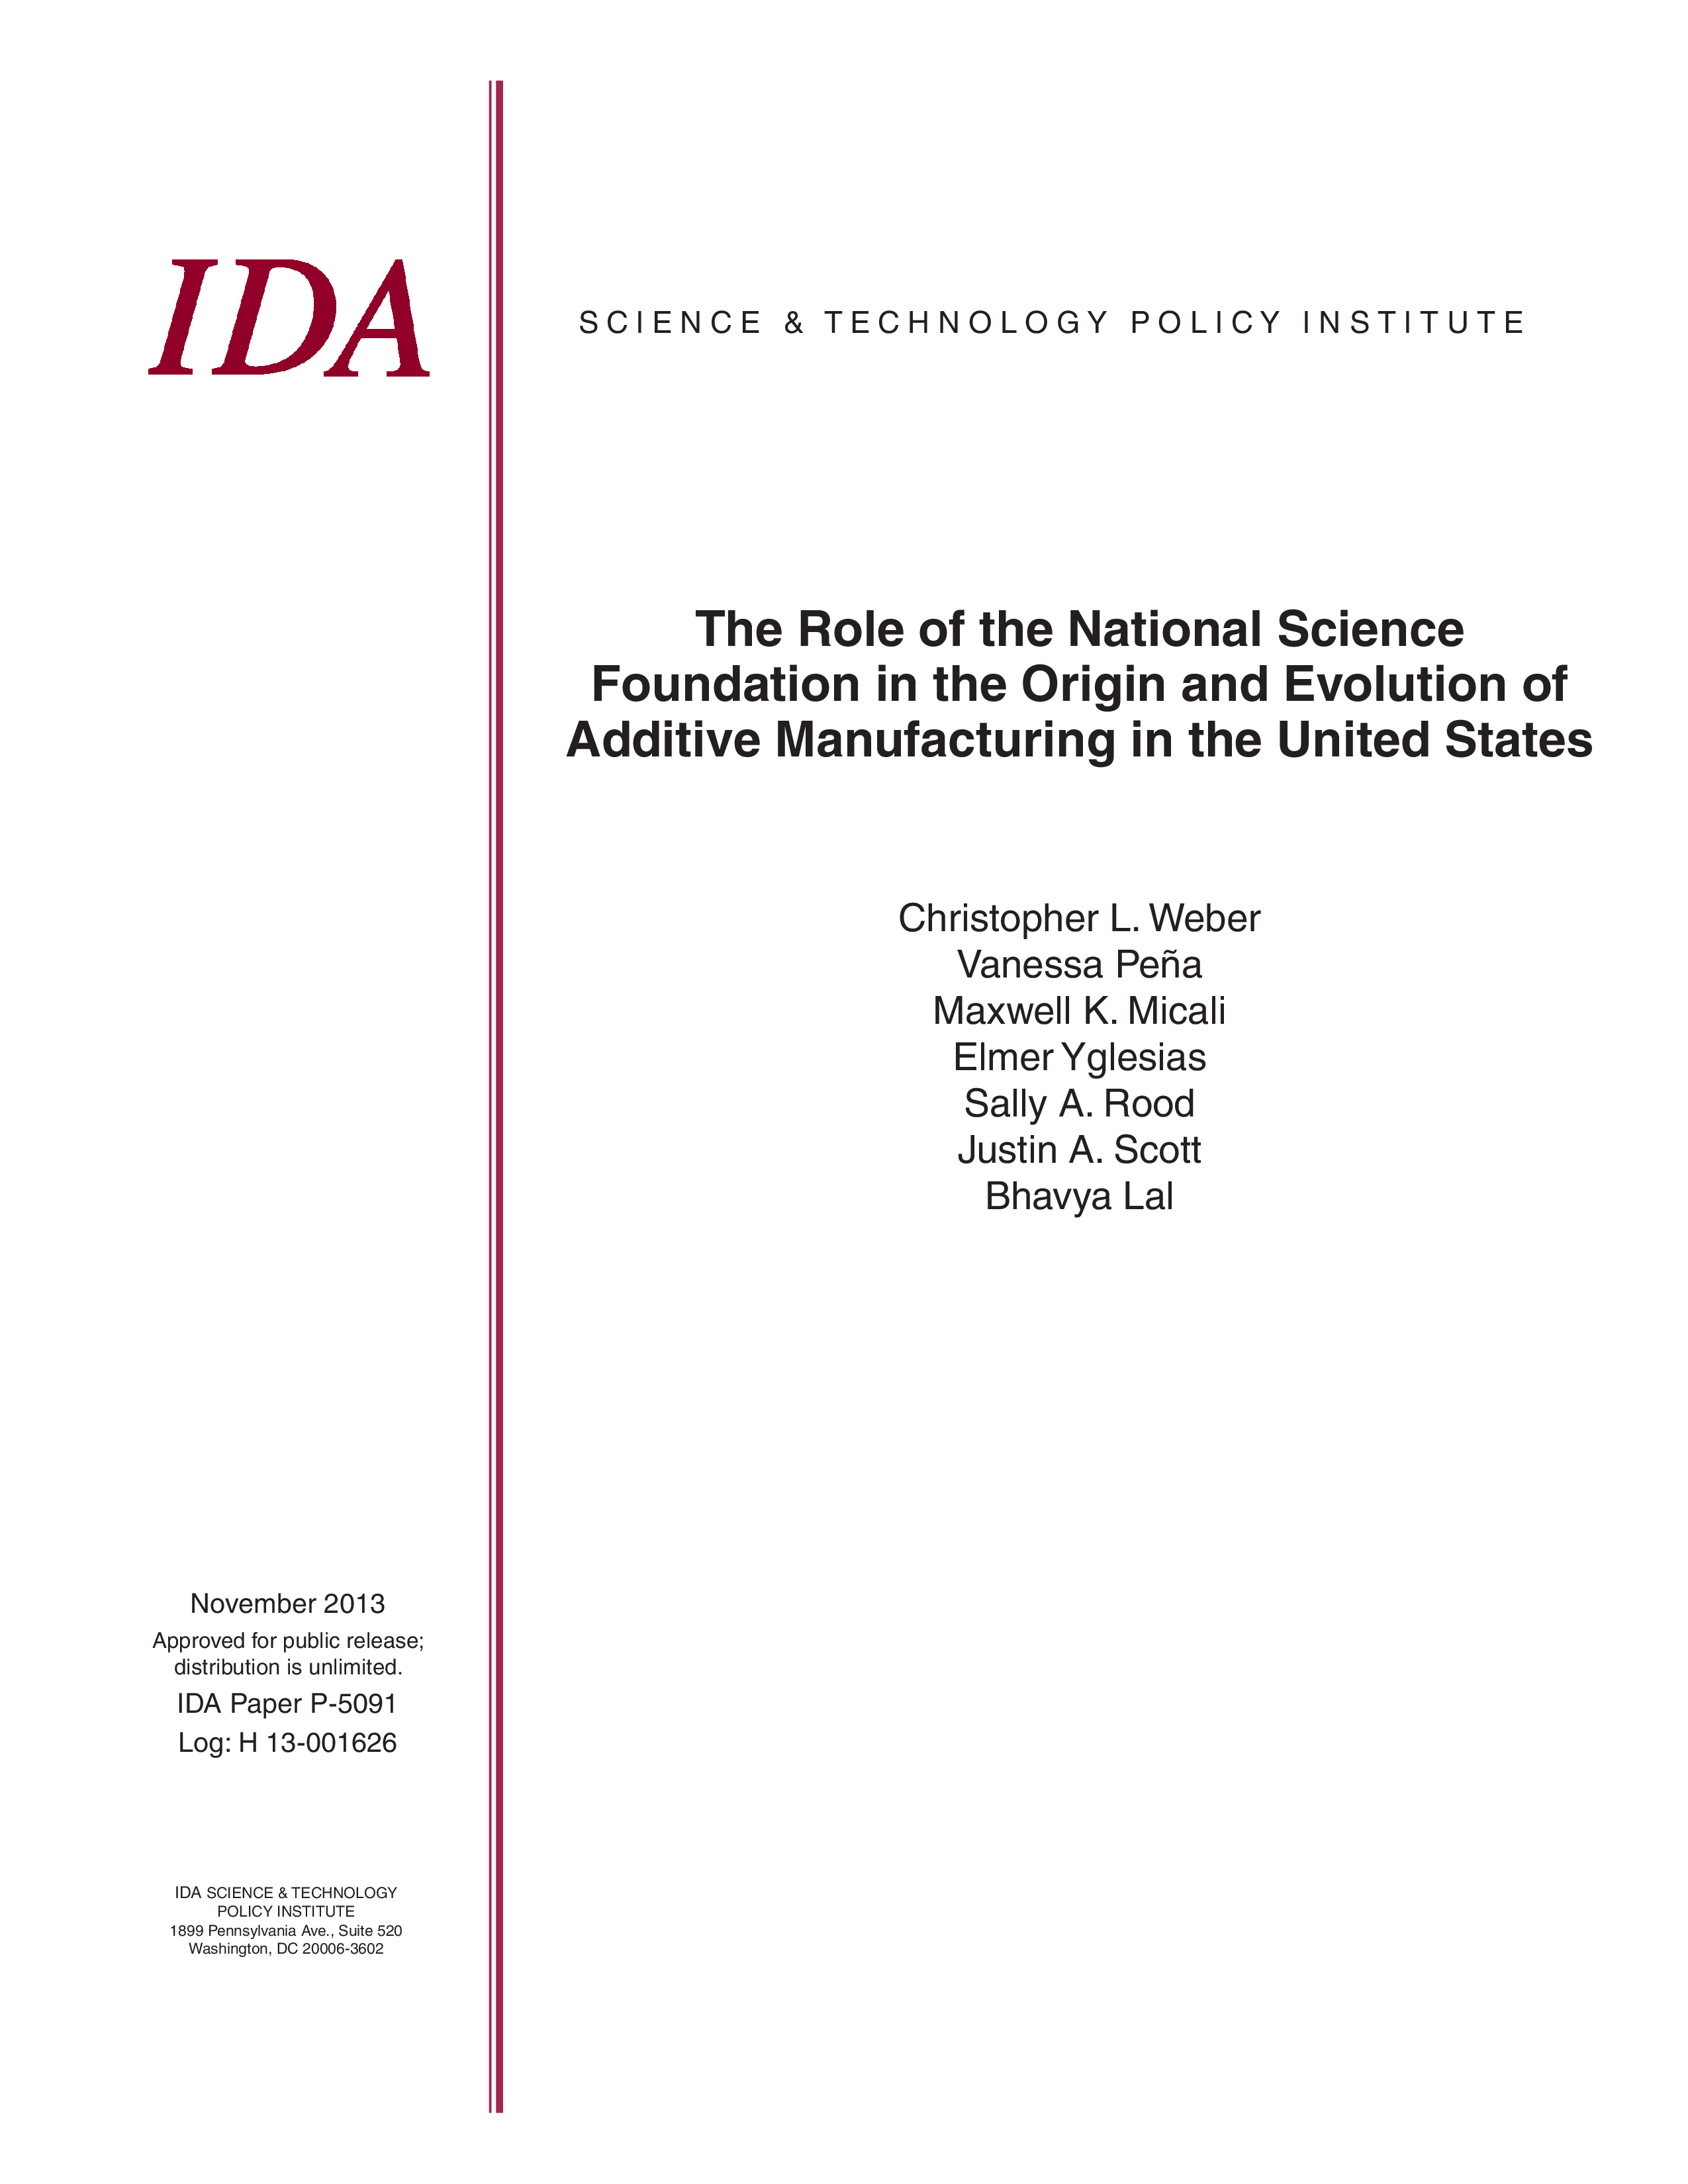 The Role of the National Science Foundation in the Origin and Evolution of Additive Manufacturing in the United States